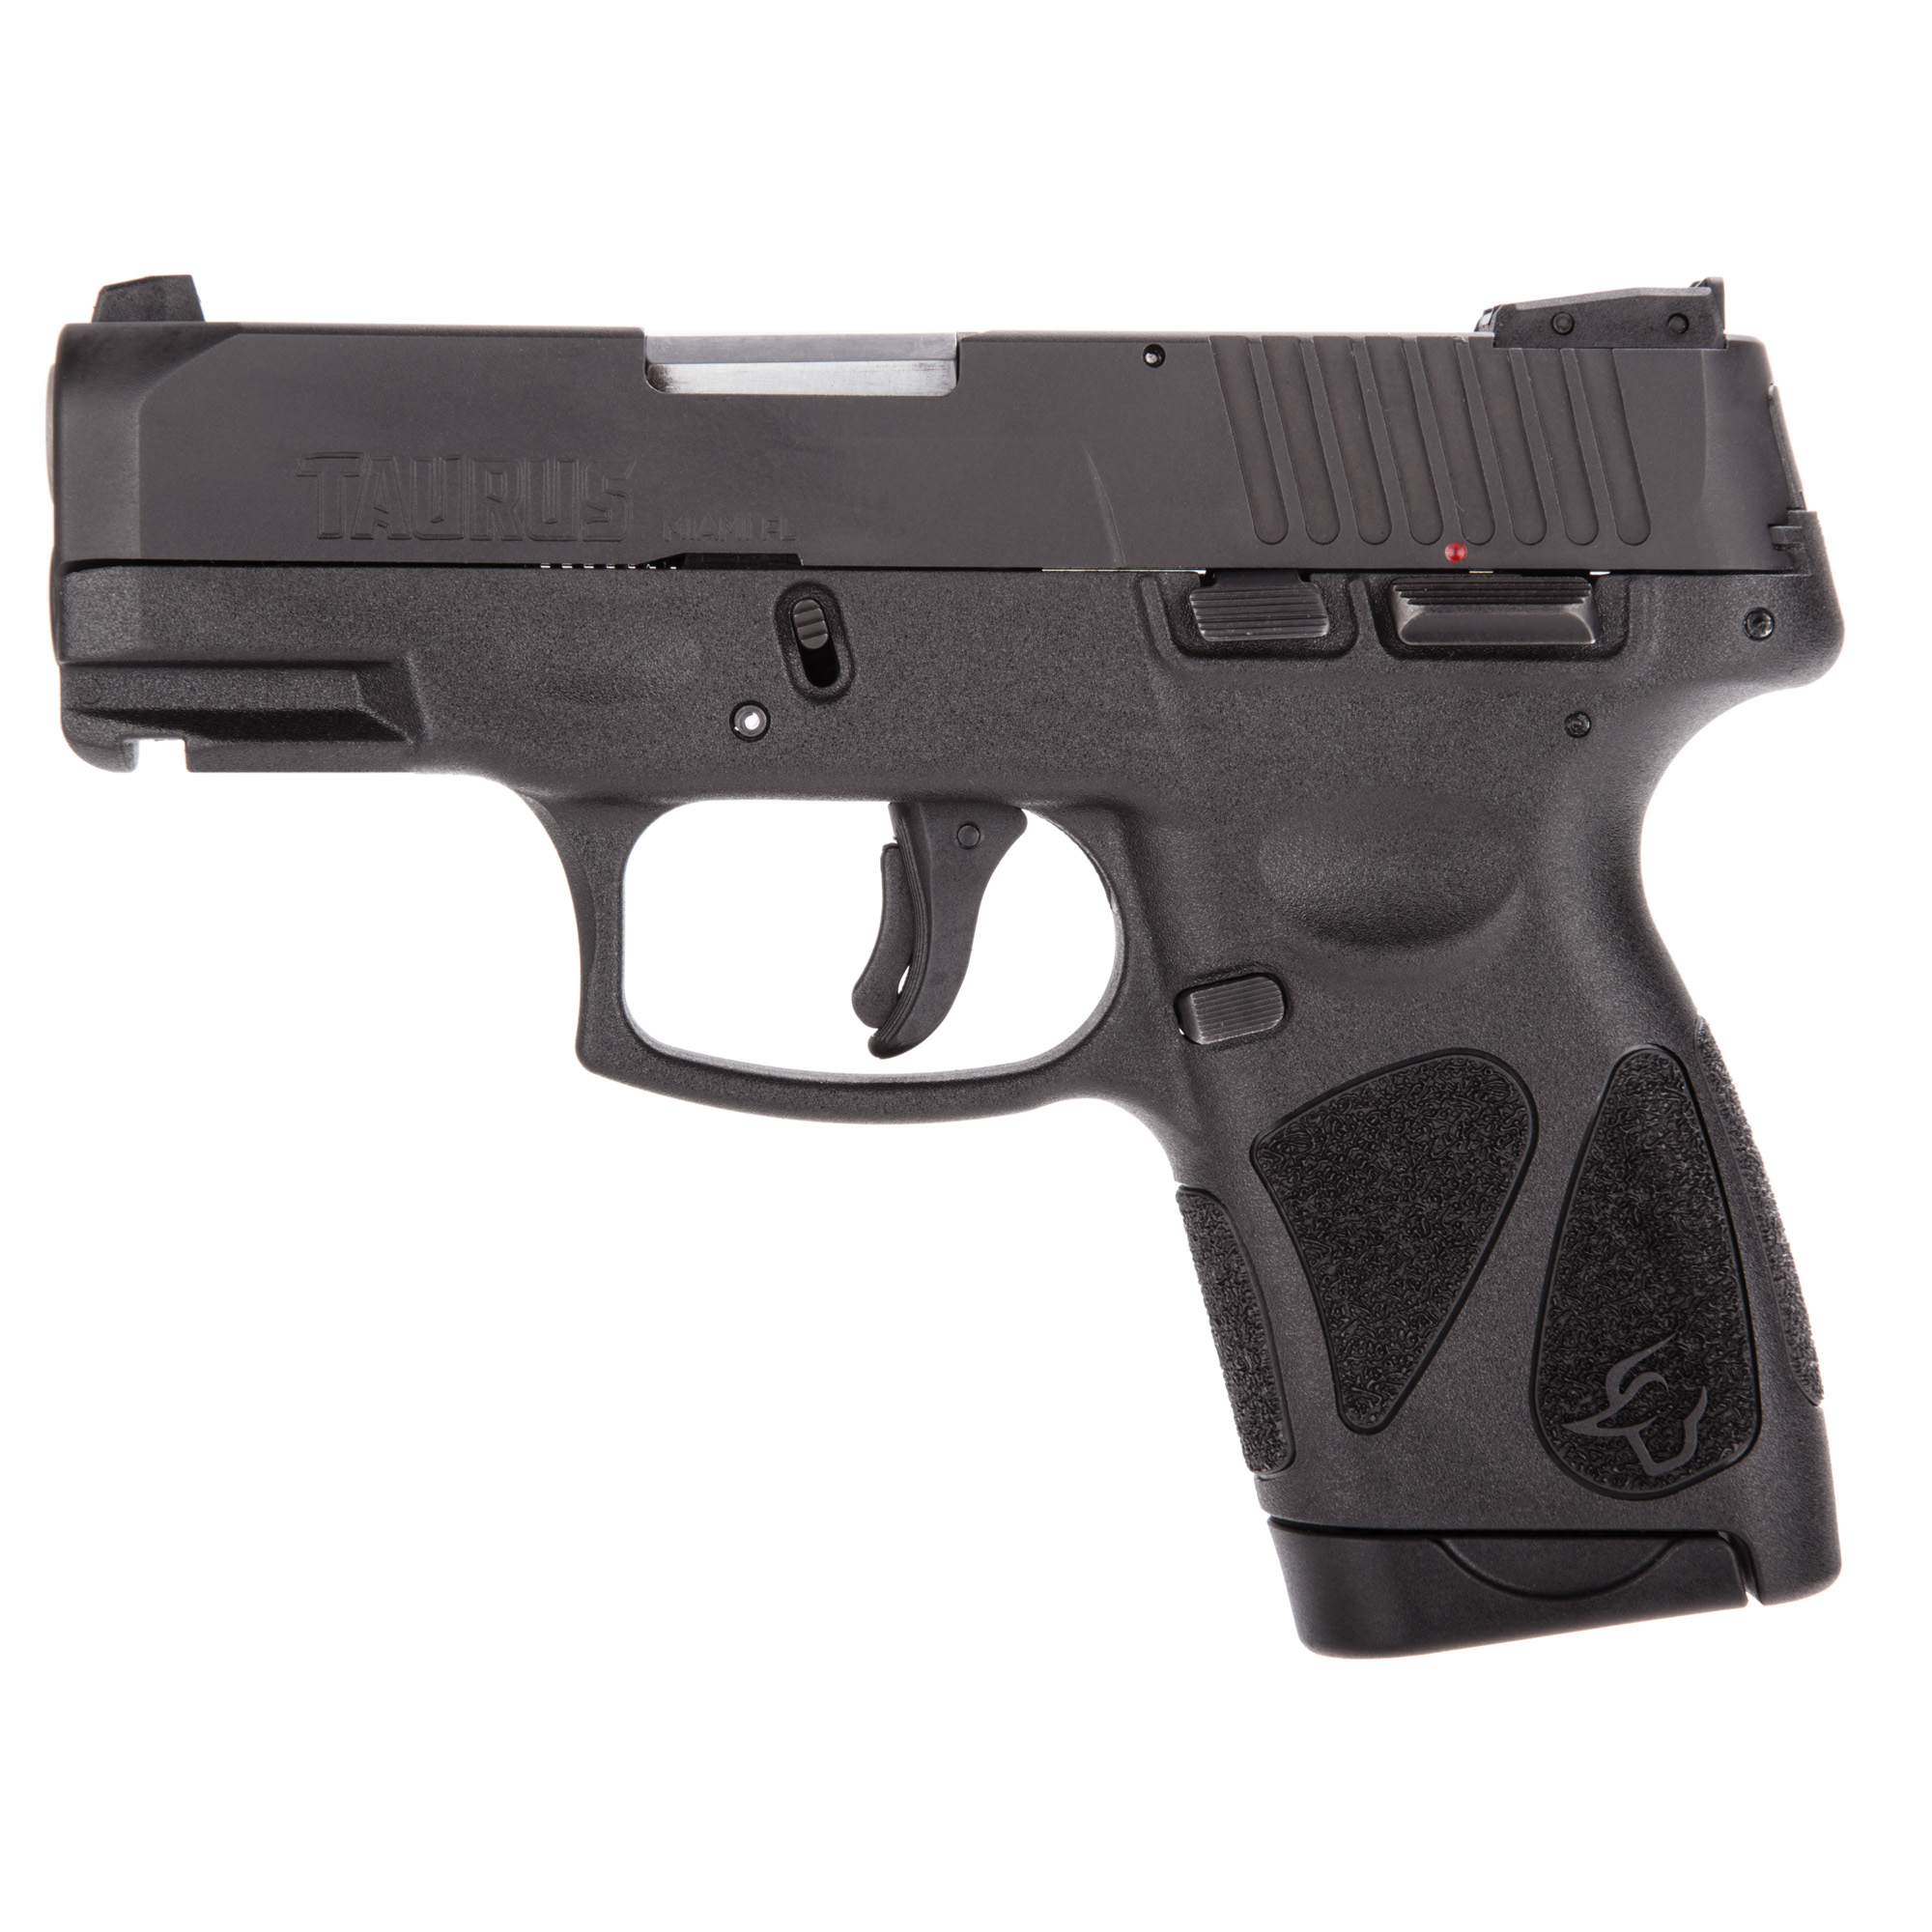 Taurus, G2S, Striker Fired, Semi-automatic, Polymer Frame Pistol, Sub-Compact, 9mm, 3.25" Barrel, Matte Finish, Black, Fixed Front Sight With Adjustable Rear Sight, Manual Thumb Safety, 7 Rounds, 2 Magazines